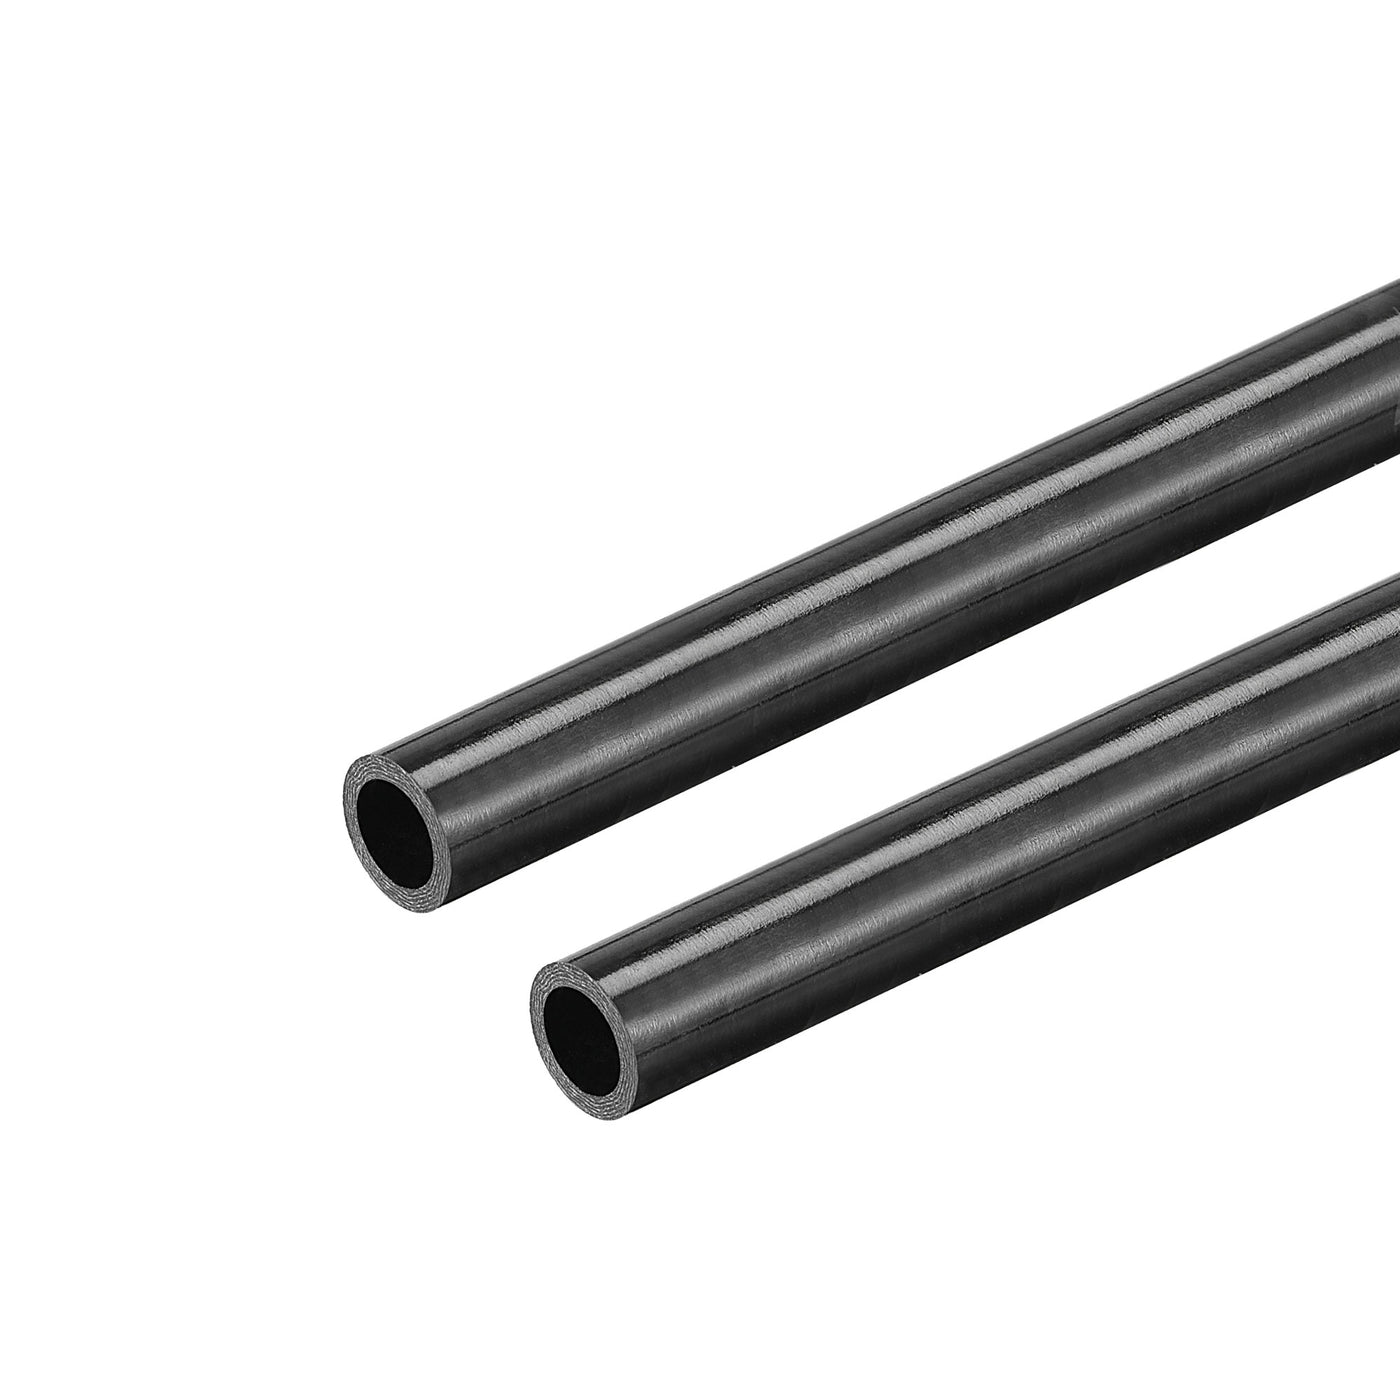 Uxcell Uxcell Carbon Fiber Round Tube 6x4x500mm 3K Roll Wrapped Glossy for RC Airplane 2Pcs